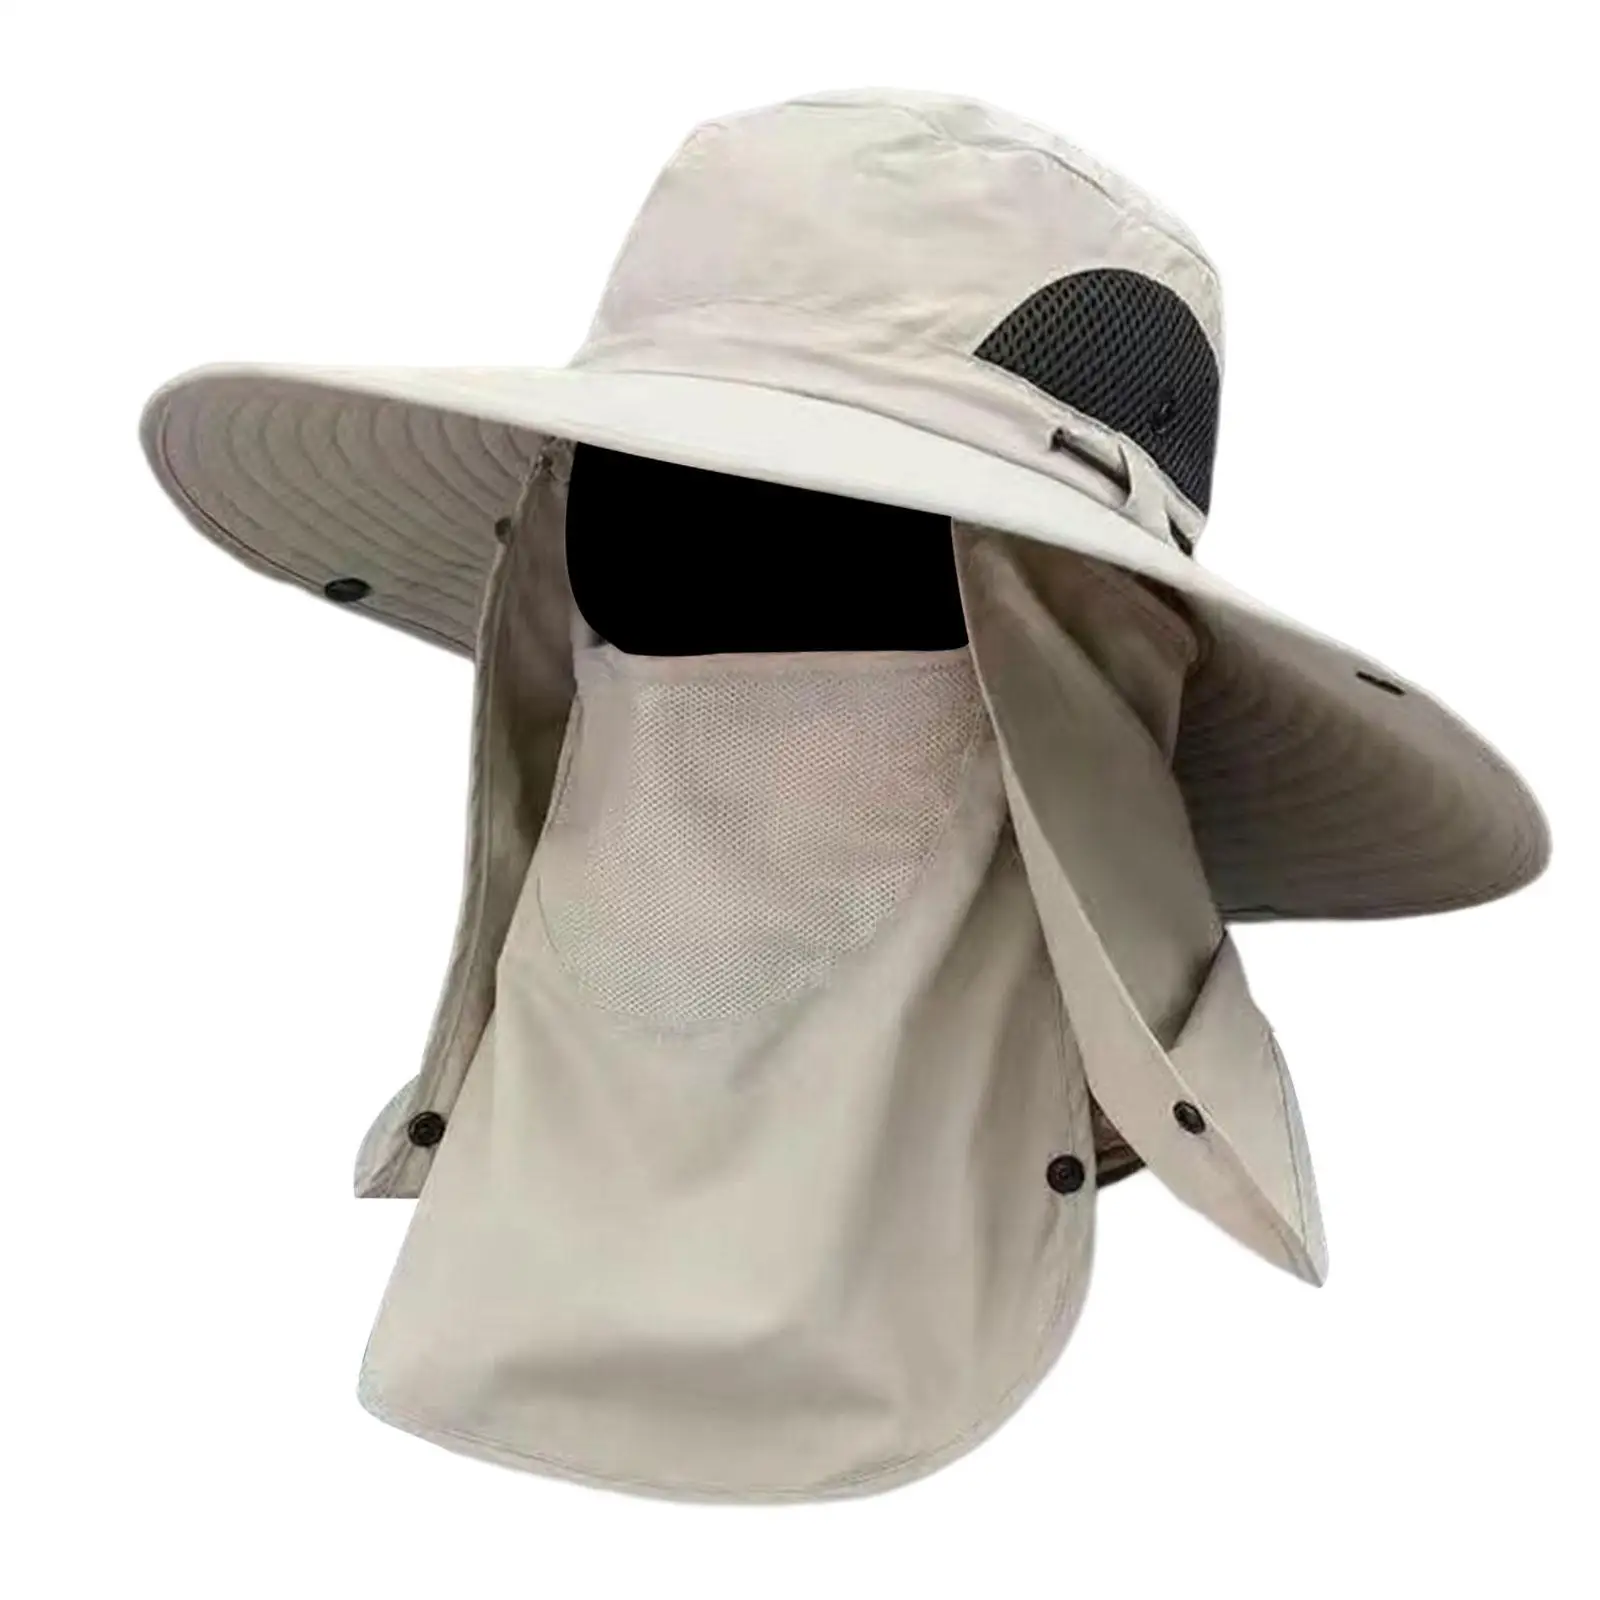 Removable Cap Neck Face Cap Foldable Sun Protection Bucket Hat Fishing Hat for